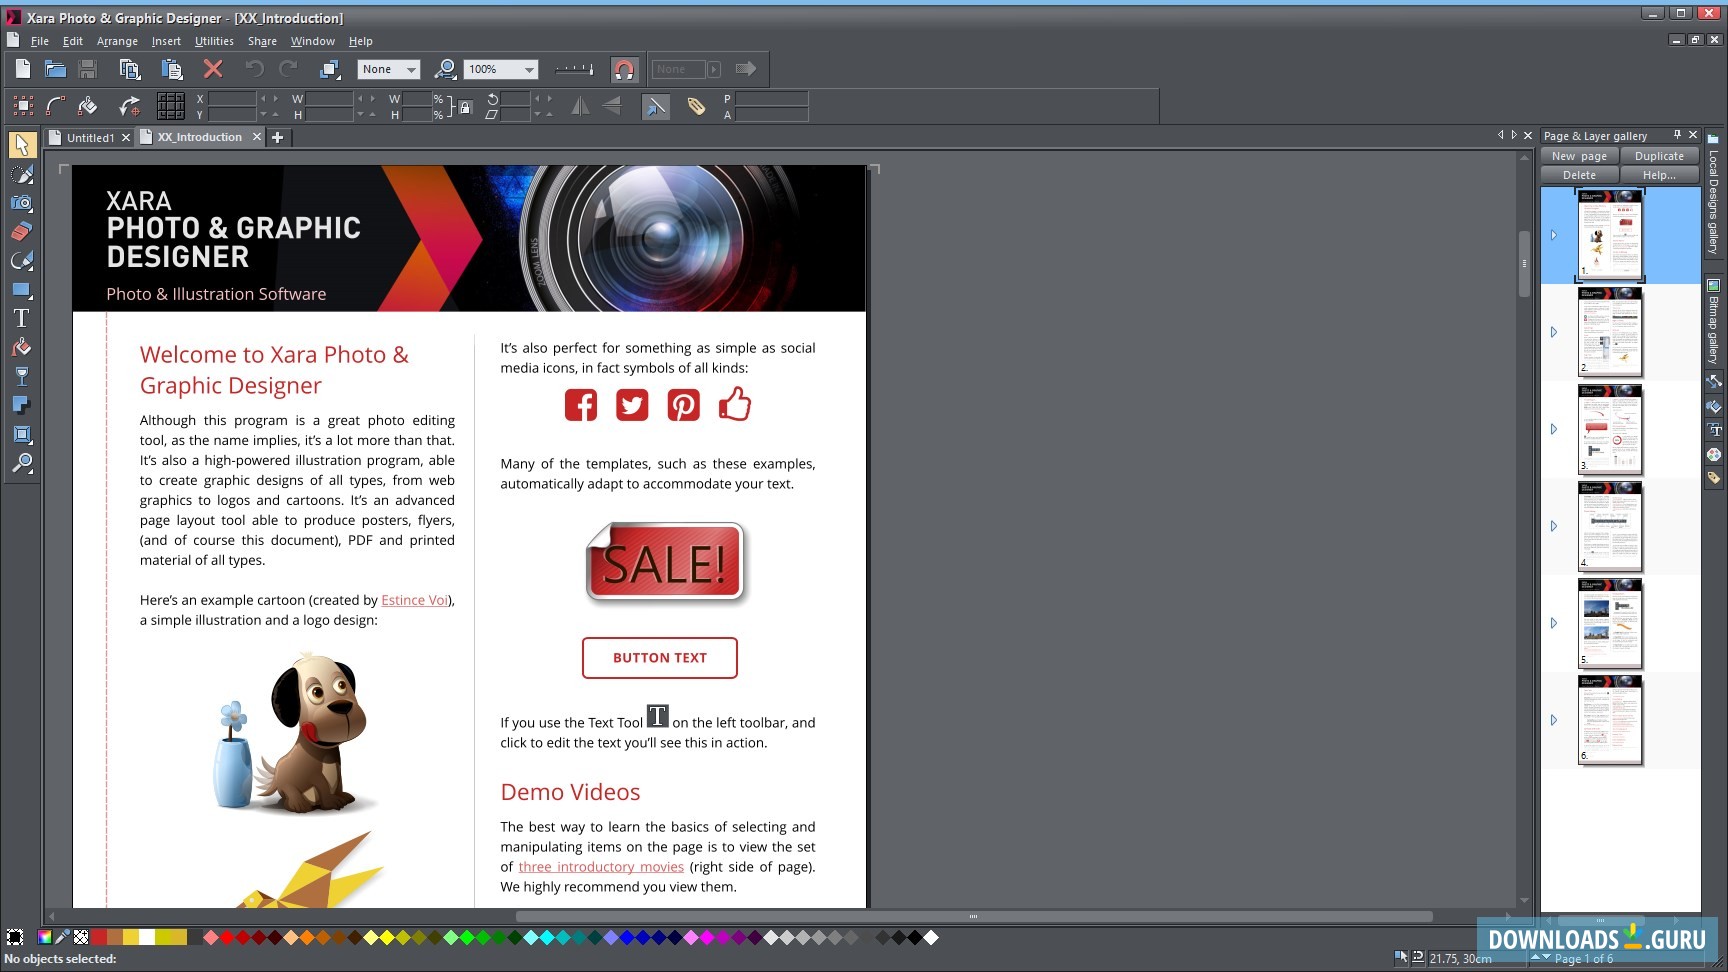 download the last version for android Xara Photo & Graphic Designer+ 23.3.0.67471